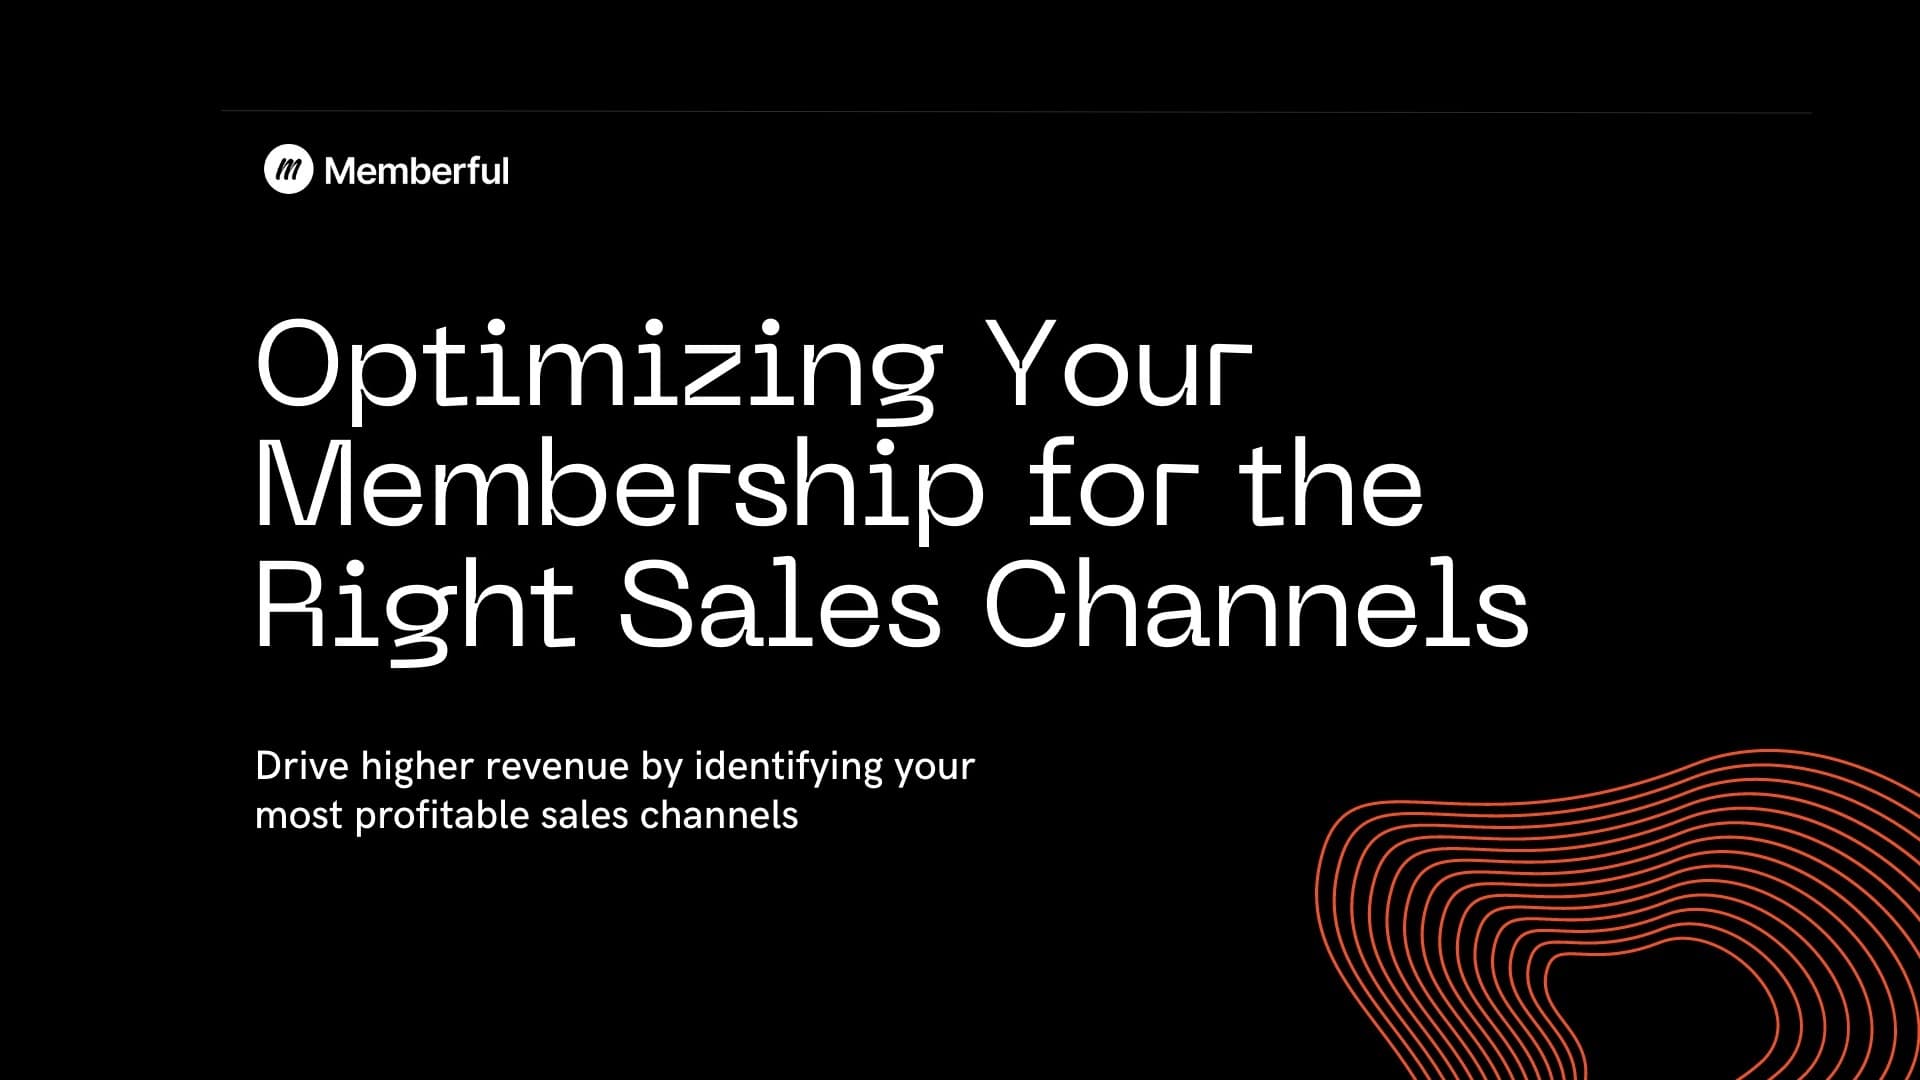 Optimizing your membership for the right sales channels